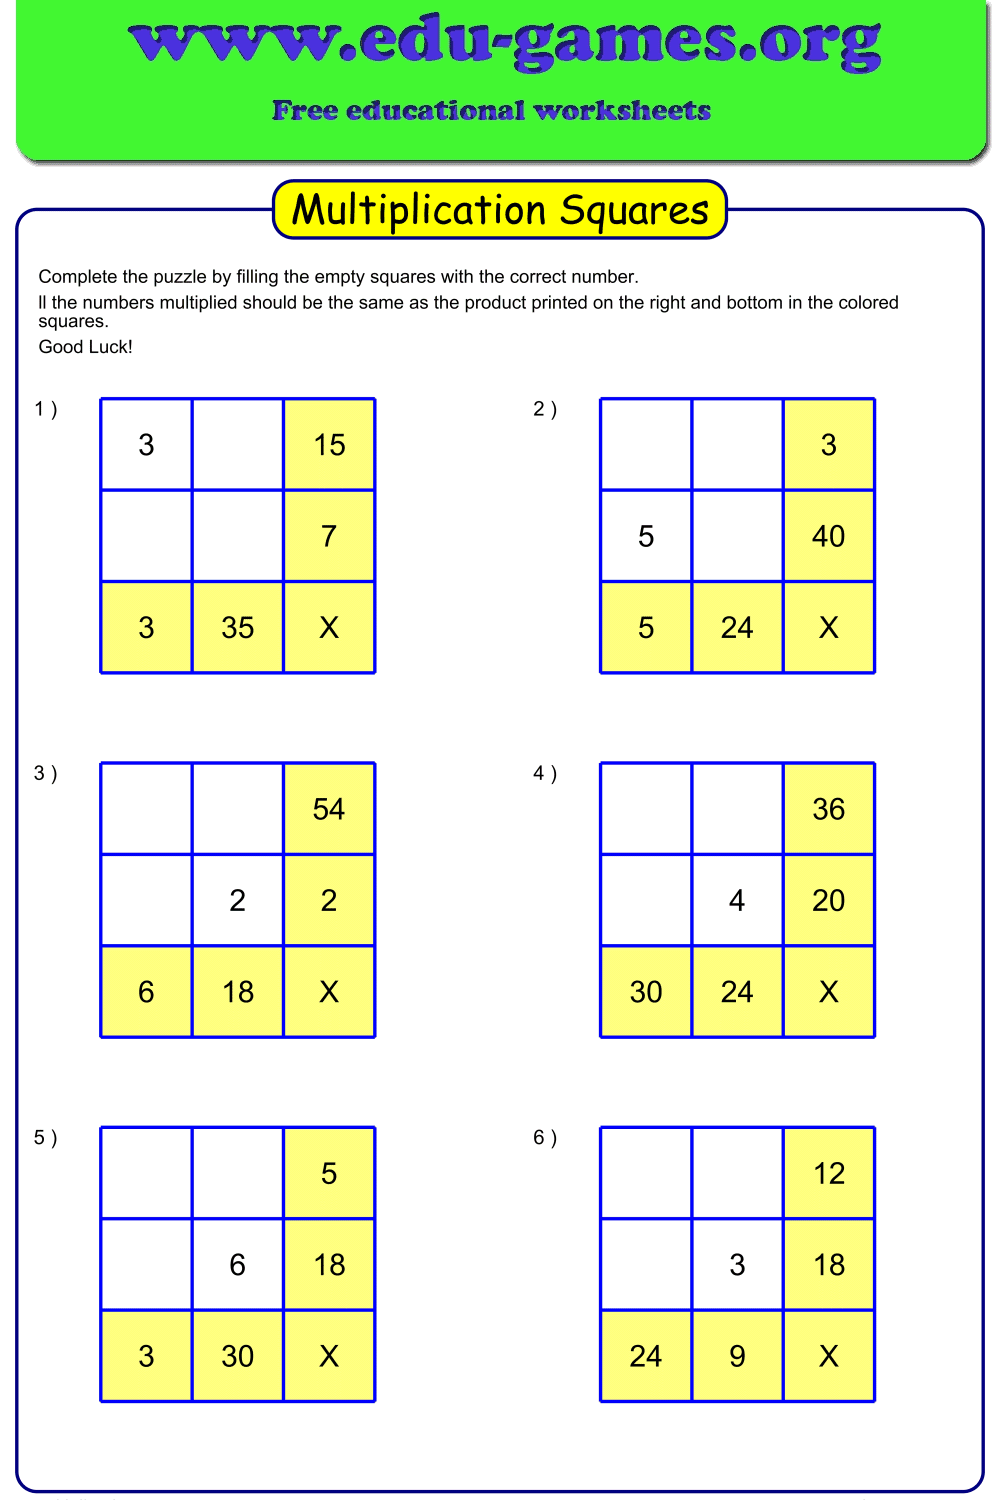 Multiplications squares png